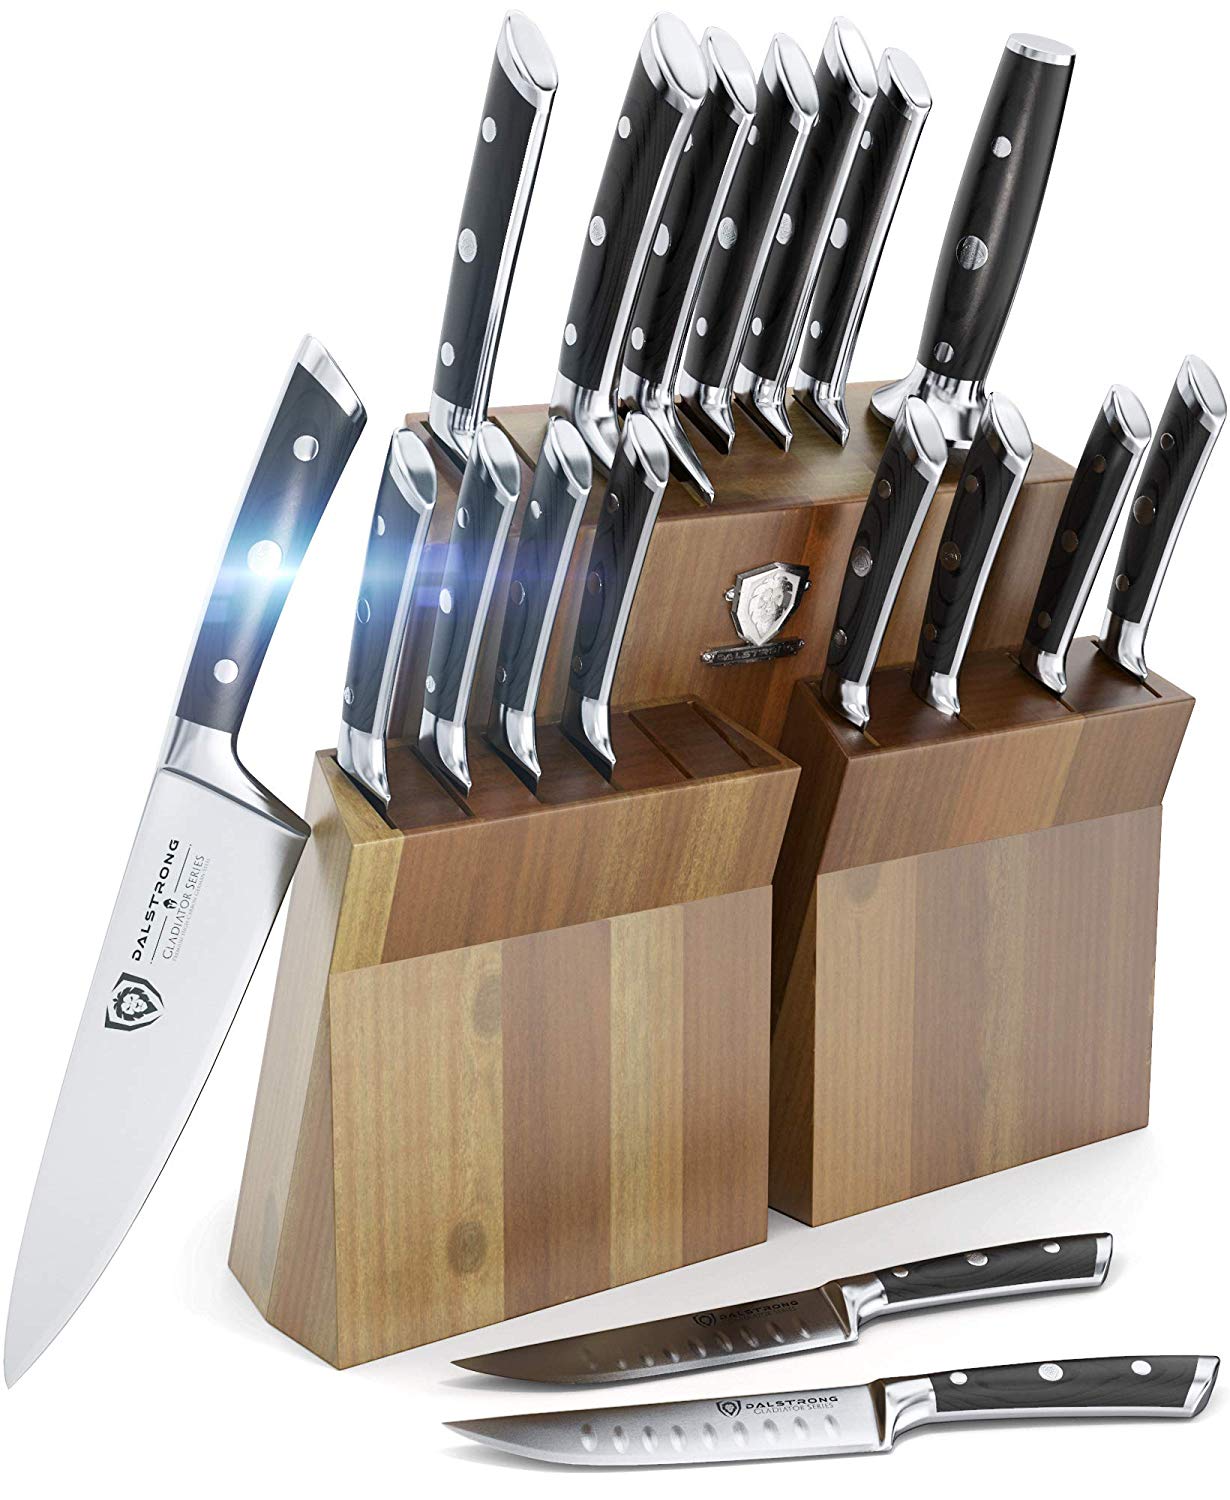 Kitchen Knife Sets How To Select The Best One For Your Needs The Kitchen Blog,Patty Pan Squash Green